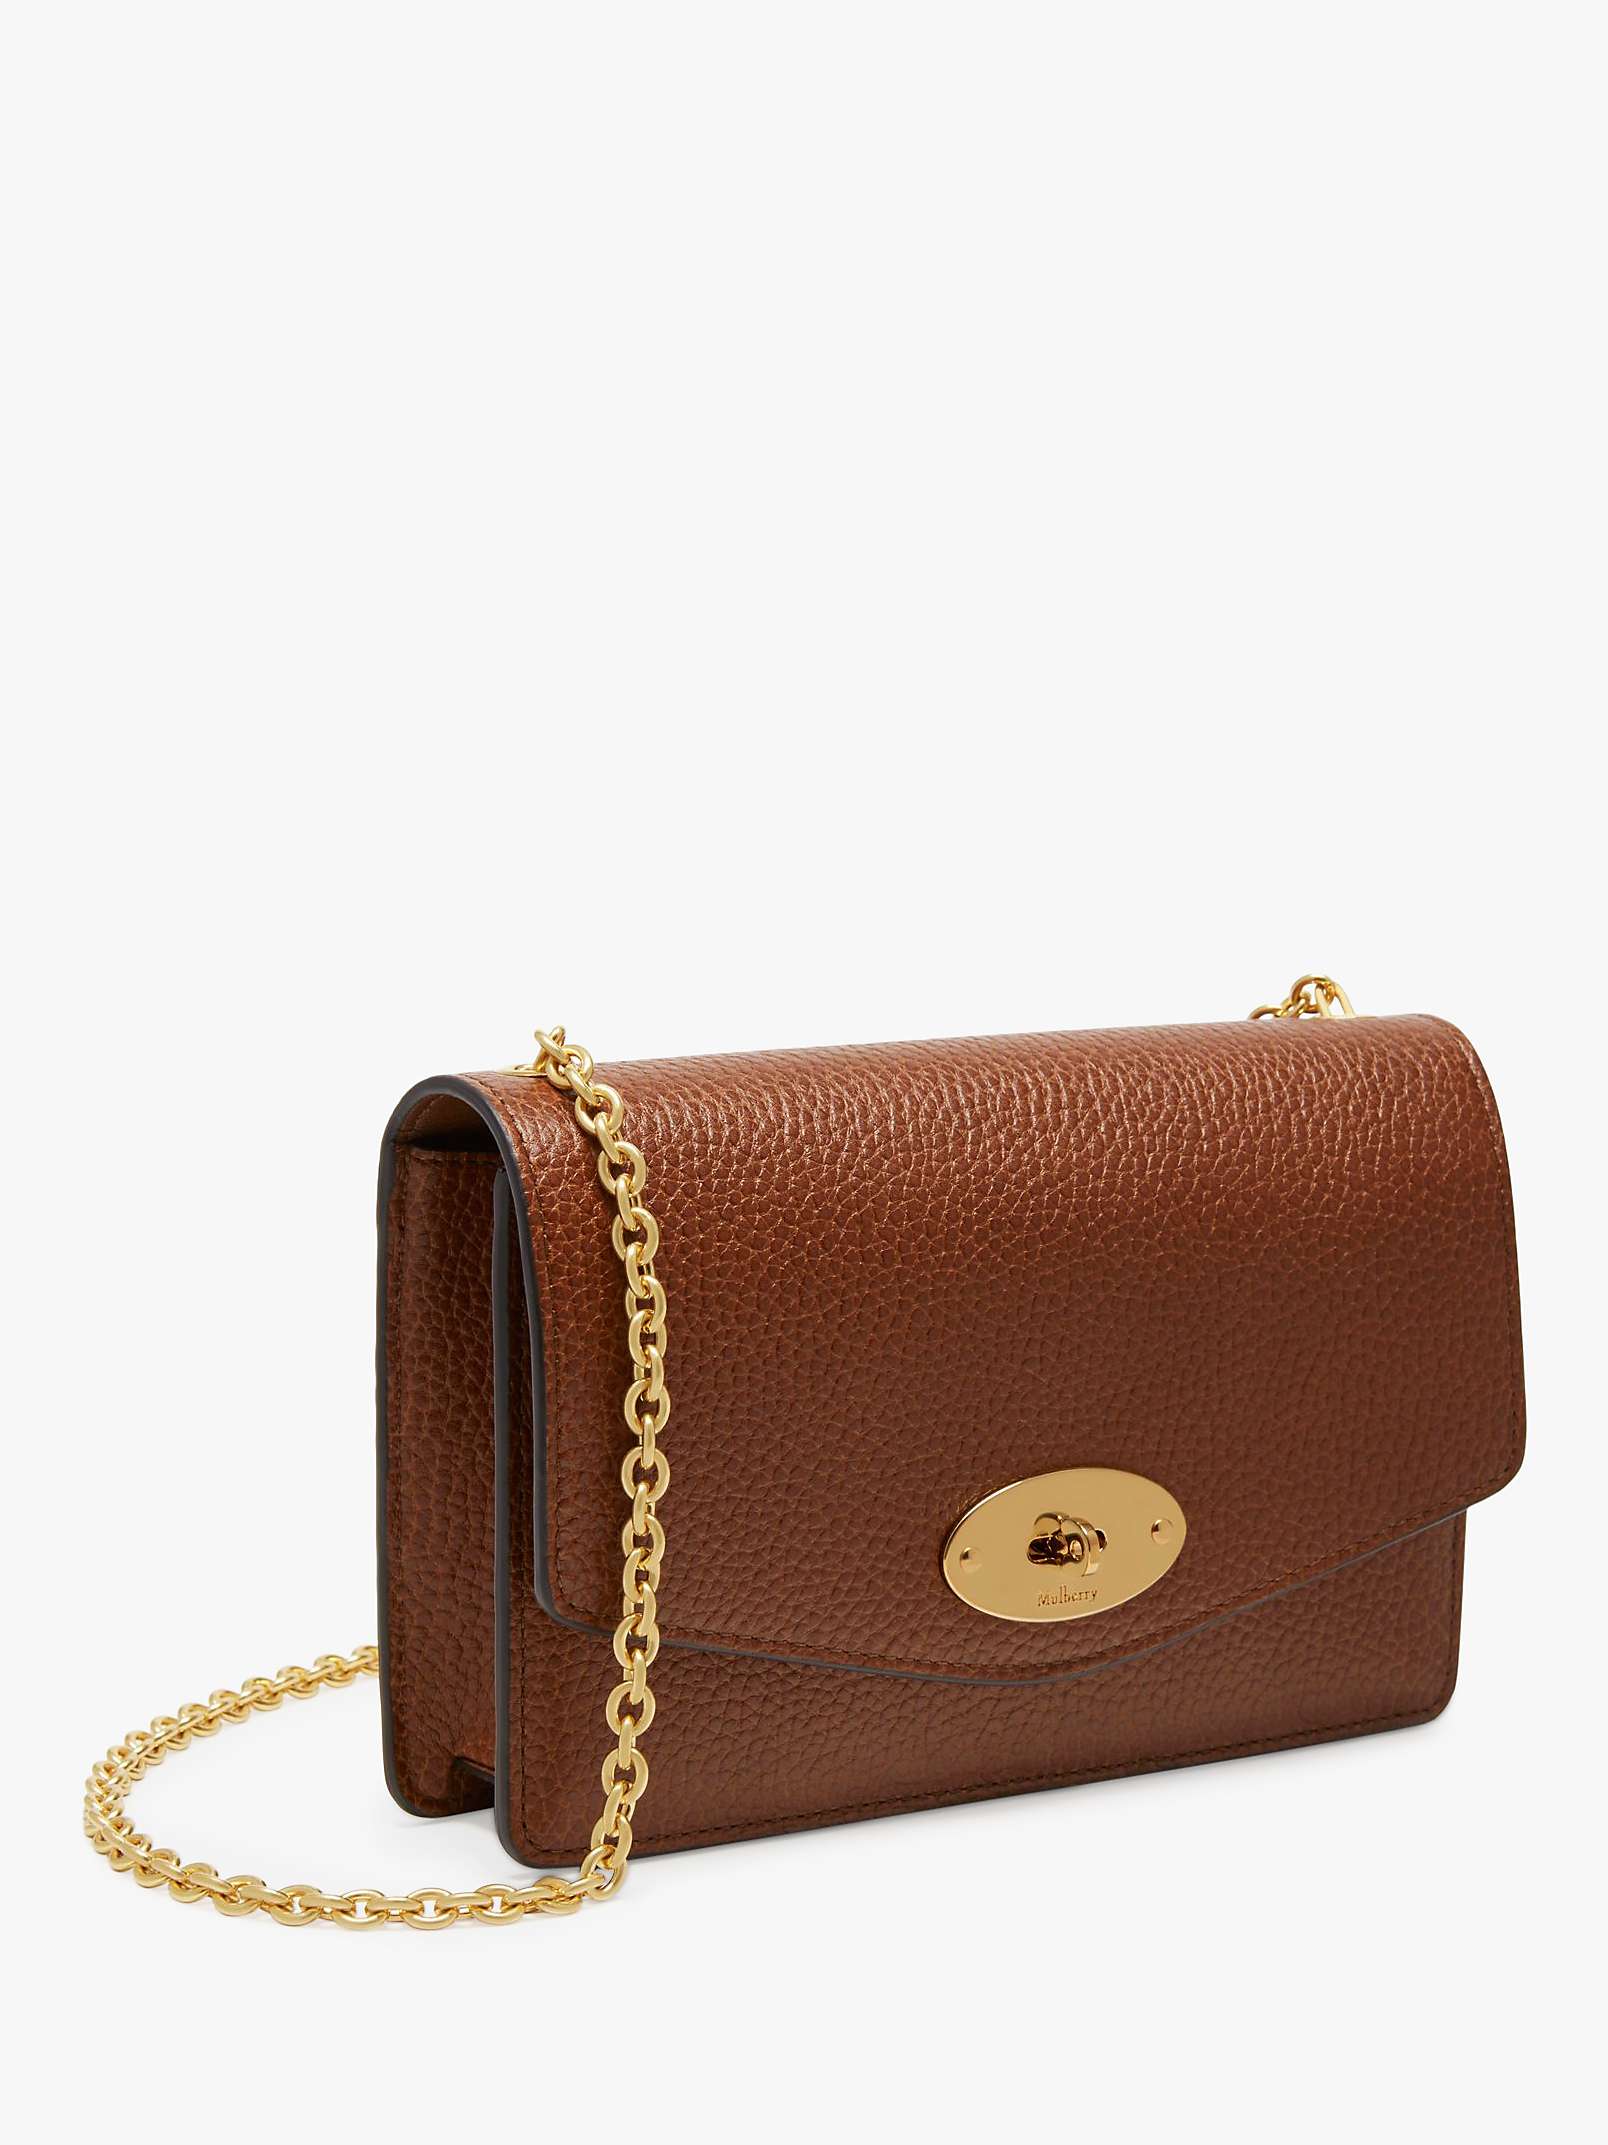 Buy Mulberry Small Darley Grain Veg Tanned Leather Cross Body Bag Online at johnlewis.com